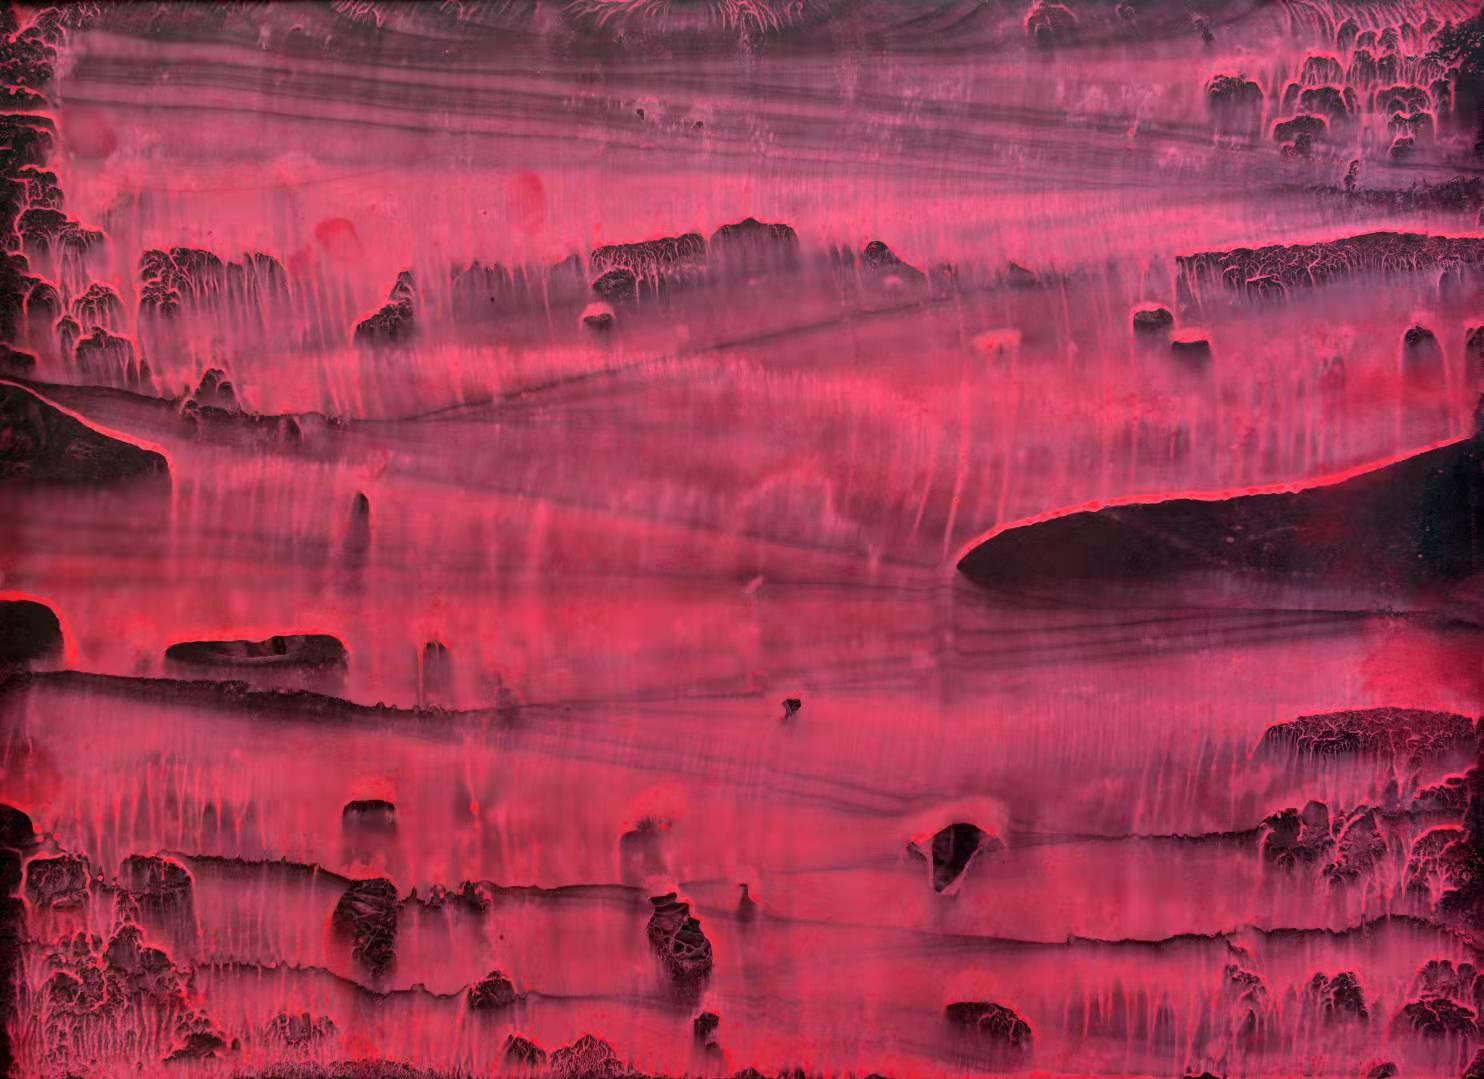 Chinese Contemporary Art by Li Chi-Guang - Series the Red Mountain No.15